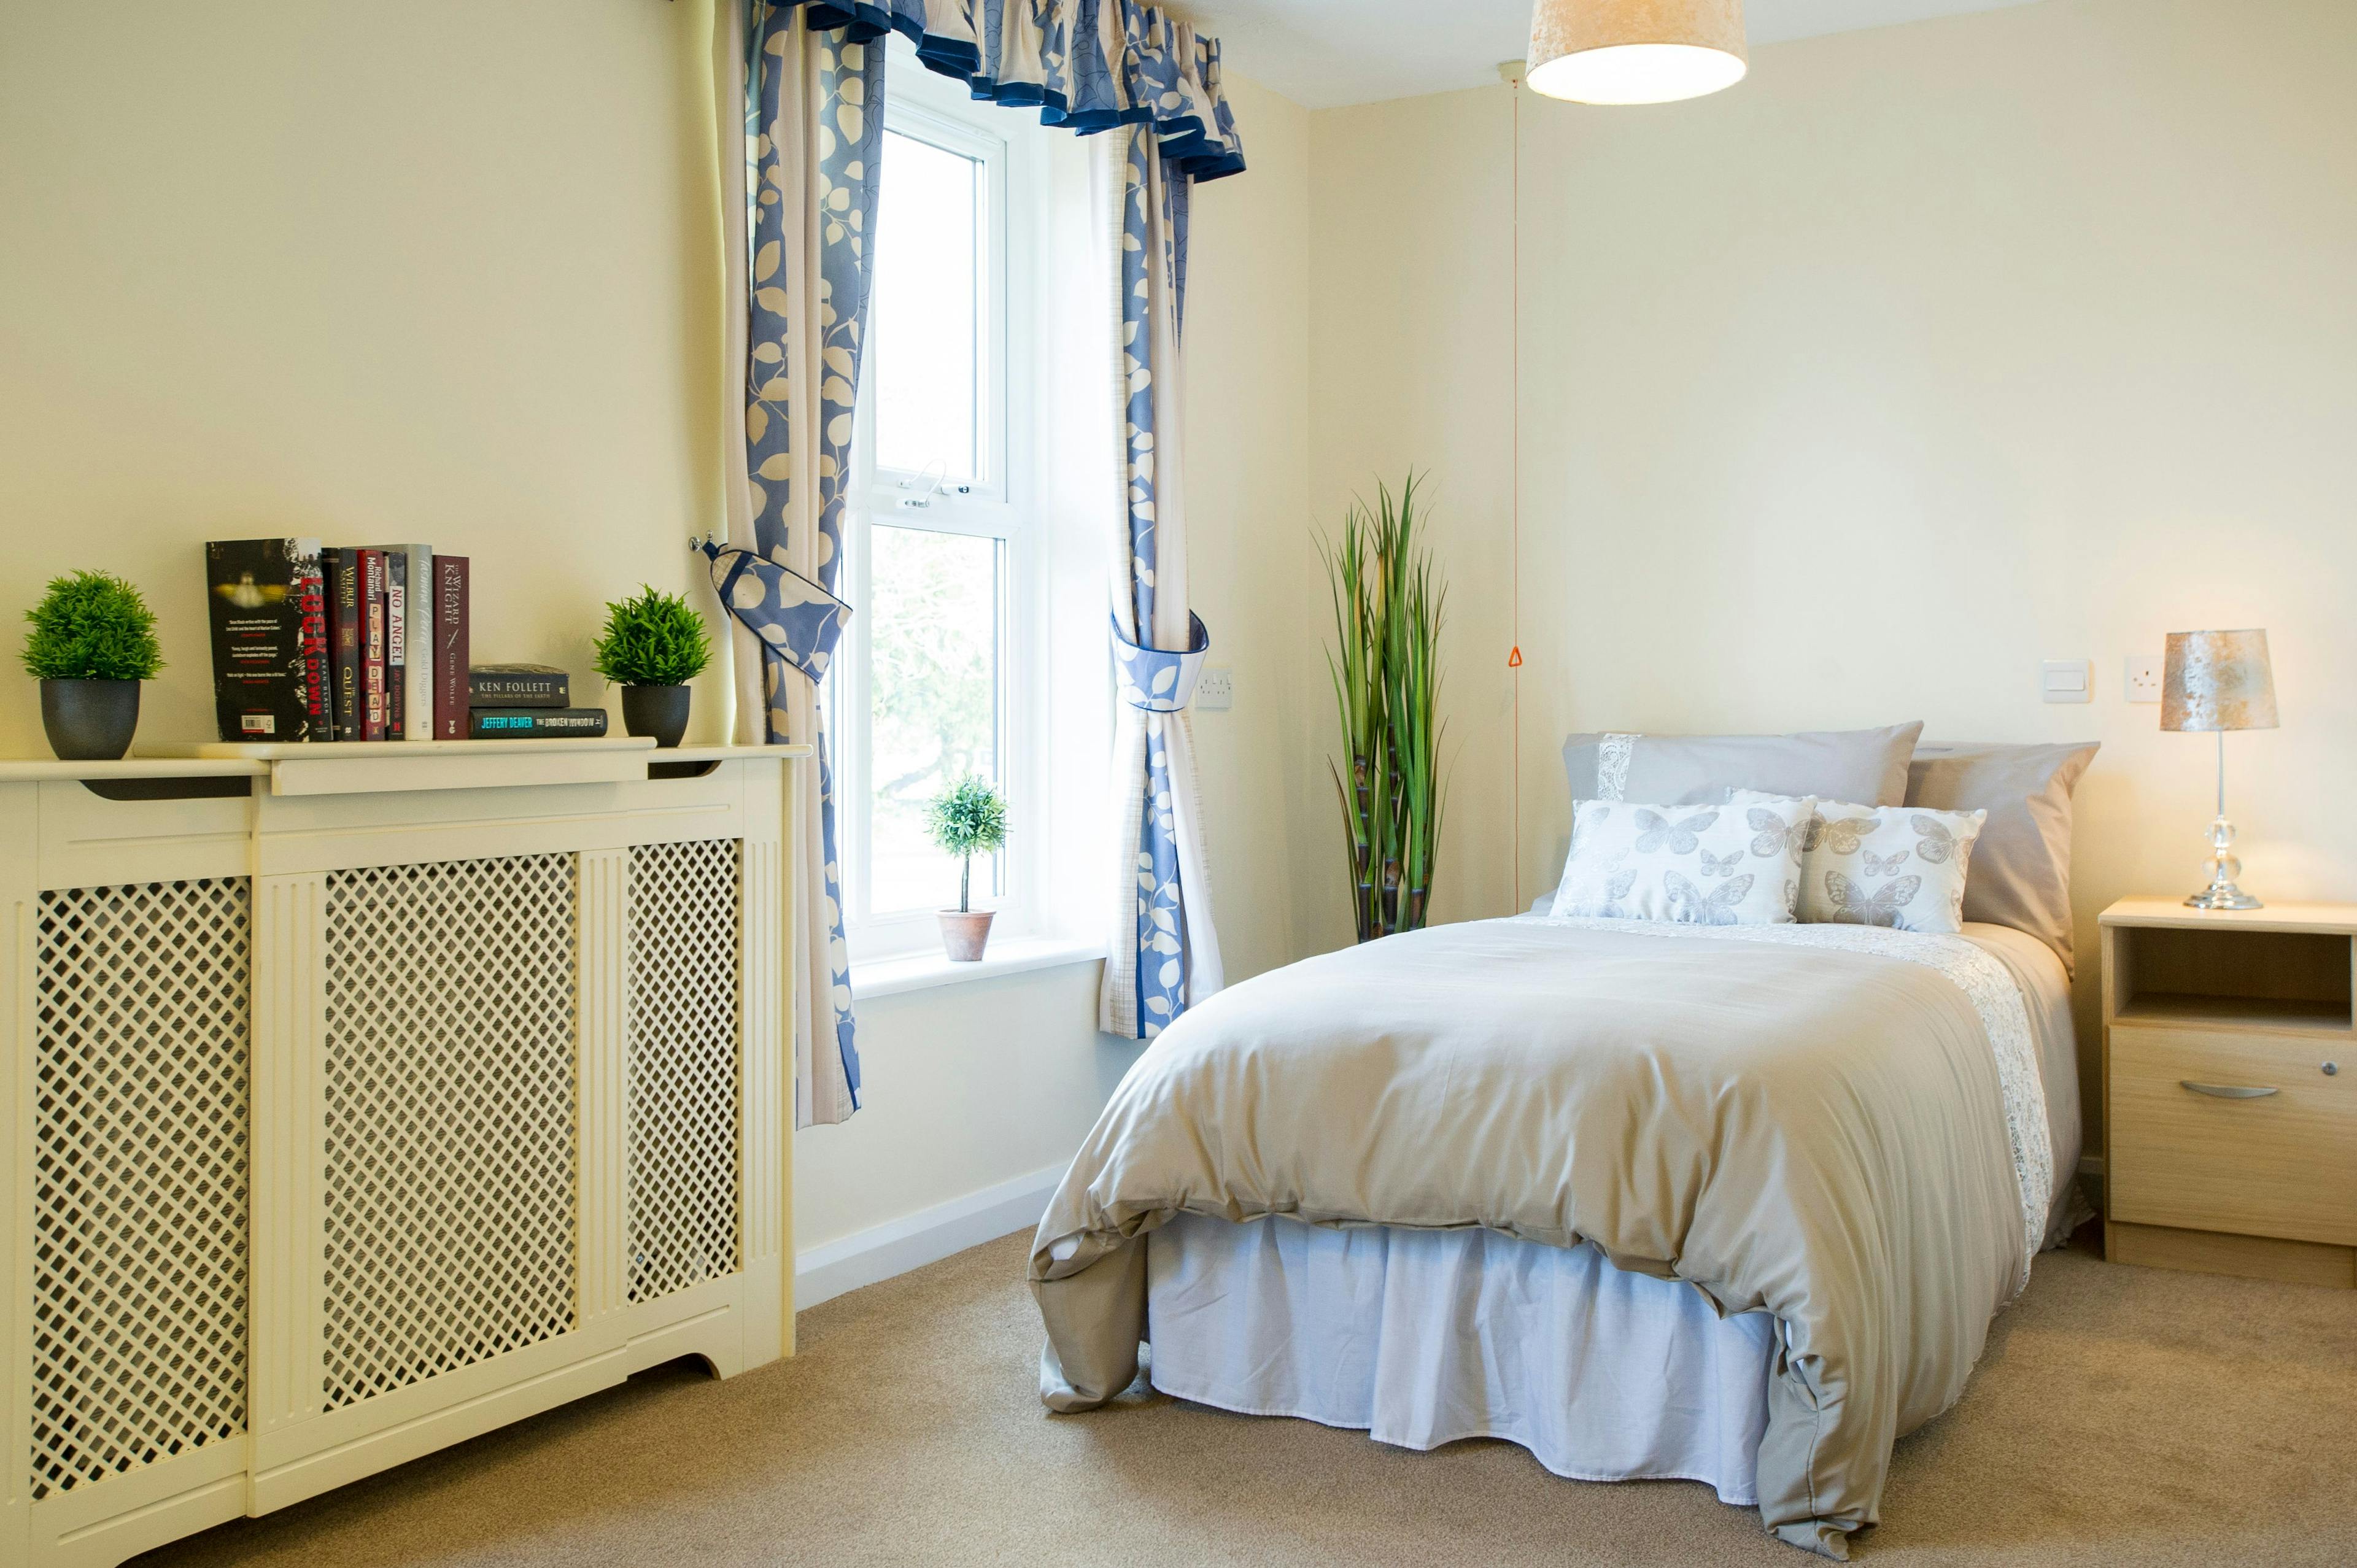 Bedroom  at Basingfield Court Care Home in Basingstoke, Hampshire